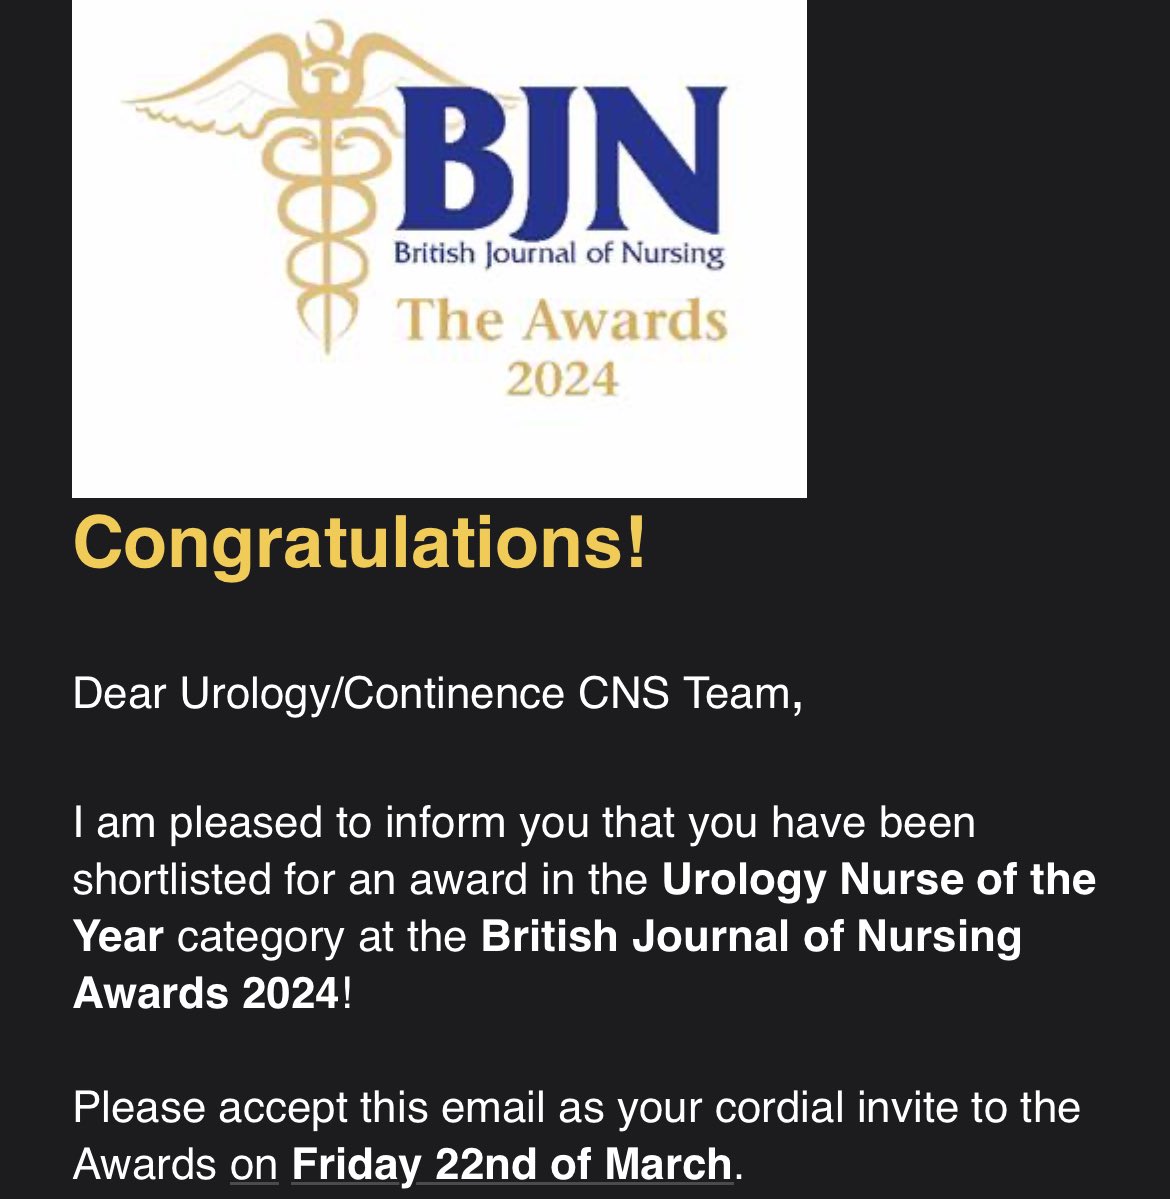 Official invite has come through!!! Couldn’t be prouder of our team right now 💙 #urologynurseoftheyear #bjnawards #bjnawards2024 #teamurology @UHDBTrust @BJNursing